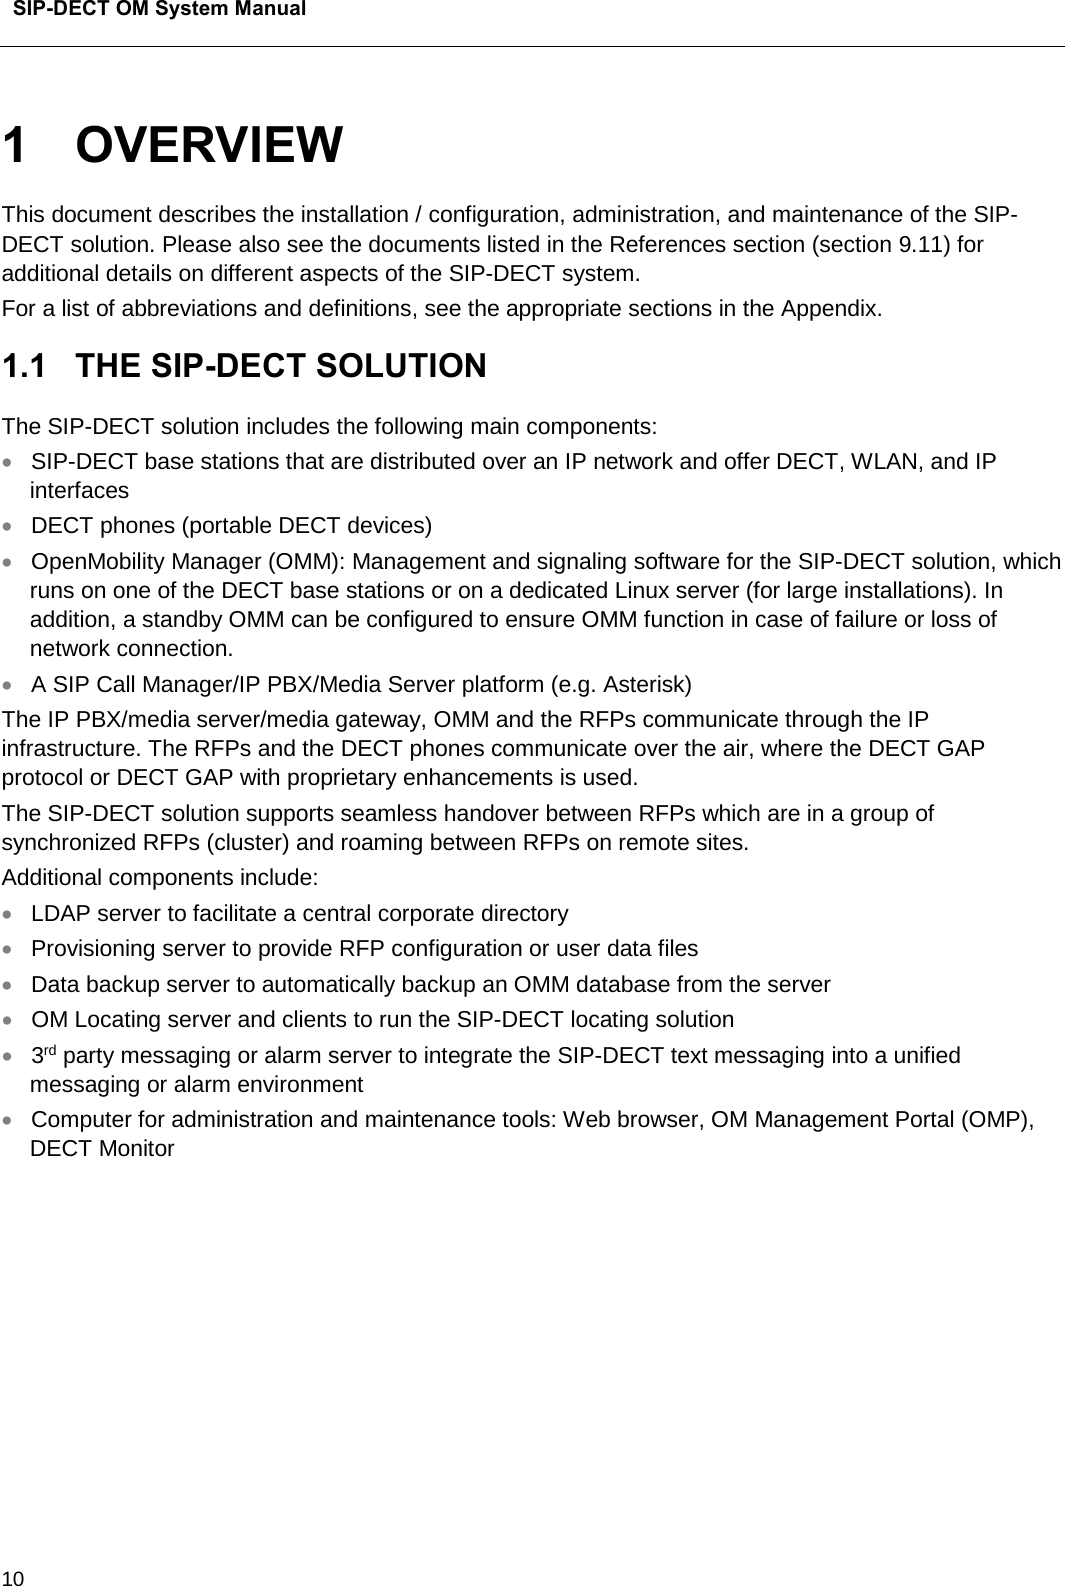  SIP-DECT OM System Manual    10 1  OVERVIEW This document describes the installation / configuration, administration, and maintenance of the SIP-DECT solution. Please also see the documents listed in the References section (section 9.11) for additional details on different aspects of the SIP-DECT system.  For a list of abbreviations and definitions, see the appropriate sections in the Appendix. 1.1  THE SIP-DECT SOLUTION The SIP-DECT solution includes the following main components:  • SIP-DECT base stations that are distributed over an IP network and offer DECT, WLAN, and IP interfaces  • DECT phones (portable DECT devices) • OpenMobility Manager (OMM): Management and signaling software for the SIP-DECT solution, which runs on one of the DECT base stations or on a dedicated Linux server (for large installations). In addition, a standby OMM can be configured to ensure OMM function in case of failure or loss of network connection.  • A SIP Call Manager/IP PBX/Media Server platform (e.g. Asterisk)  The IP PBX/media server/media gateway, OMM and the RFPs communicate through the IP infrastructure. The RFPs and the DECT phones communicate over the air, where the DECT GAP protocol or DECT GAP with proprietary enhancements is used.  The SIP-DECT solution supports seamless handover between RFPs which are in a group of synchronized RFPs (cluster) and roaming between RFPs on remote sites.  Additional components include:  • LDAP server to facilitate a central corporate directory • Provisioning server to provide RFP configuration or user data files  • Data backup server to automatically backup an OMM database from the server • OM Locating server and clients to run the SIP-DECT locating solution • 3rd party messaging or alarm server to integrate the SIP-DECT text messaging into a unified messaging or alarm environment • Computer for administration and maintenance tools: Web browser, OM Management Portal (OMP), DECT Monitor 